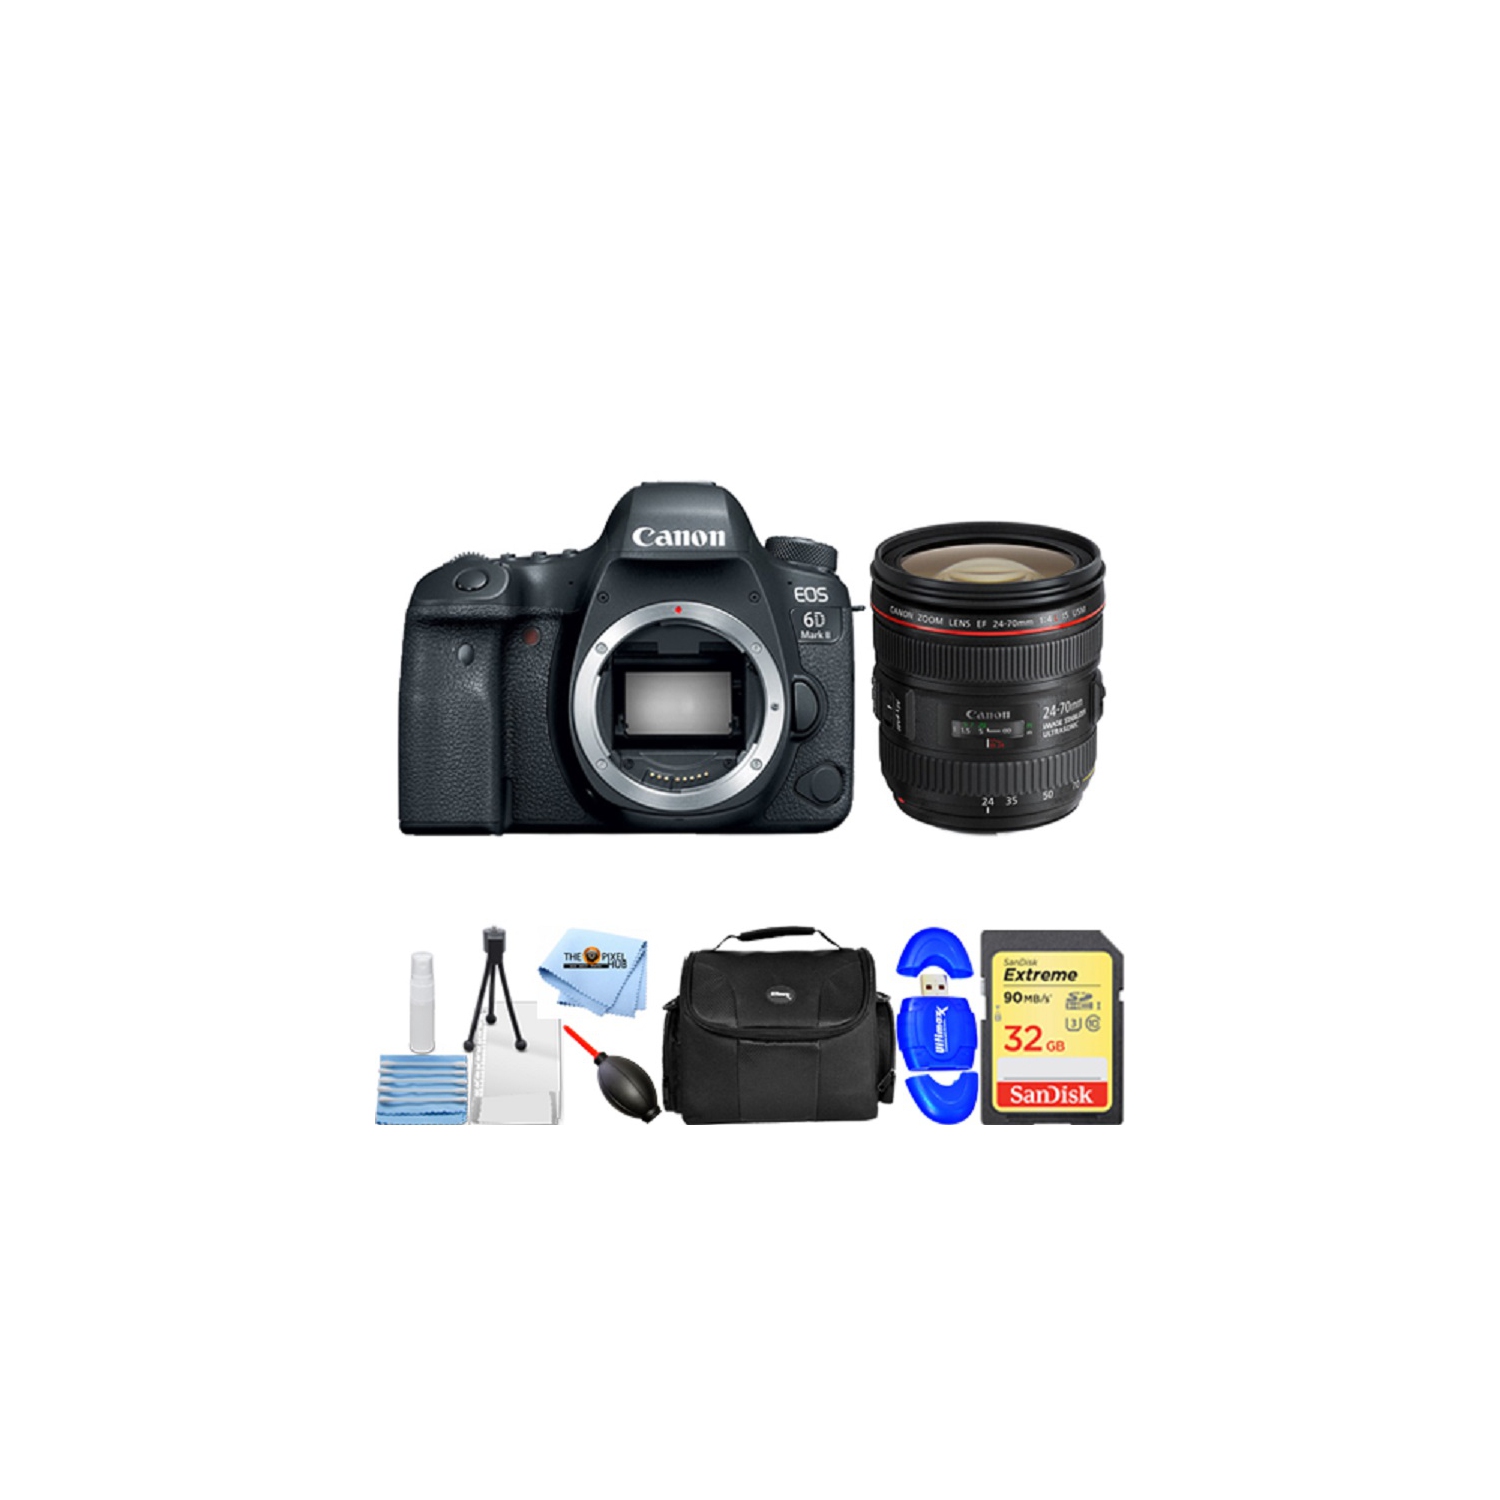 Canon EOS 6D Mark II DSLR and 24-70mm f/4L IS USM Lens - Essential 32GB Bundle